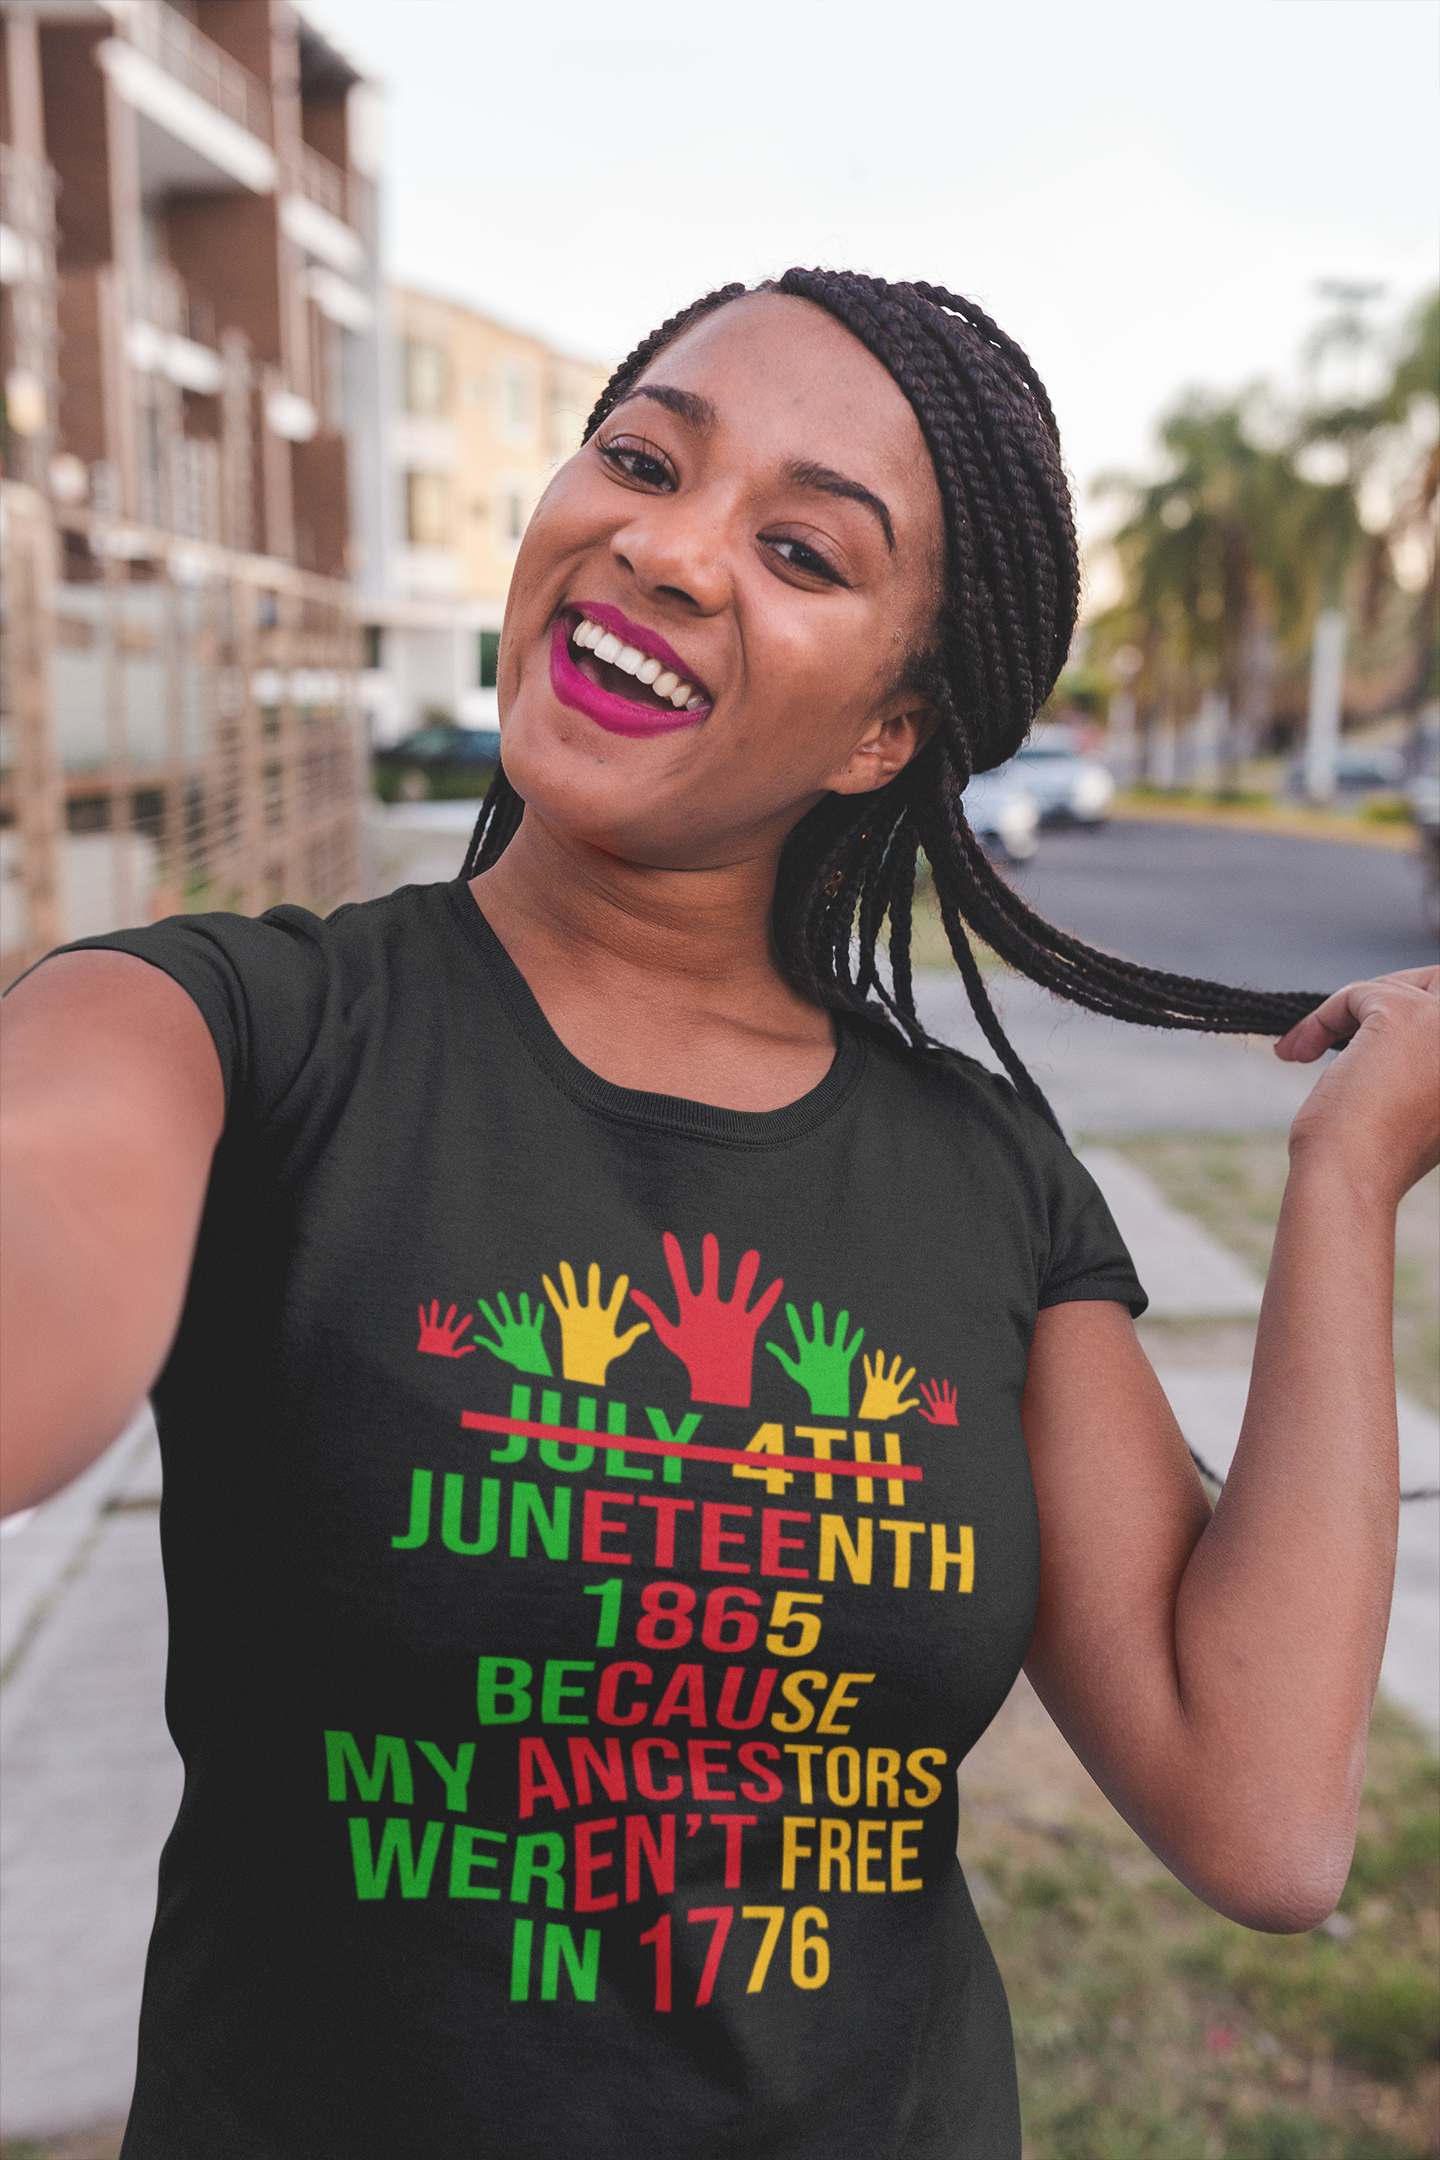 Juneteenth Colorful Hands 1865 Because My Ancestors Weren't Free in 1776